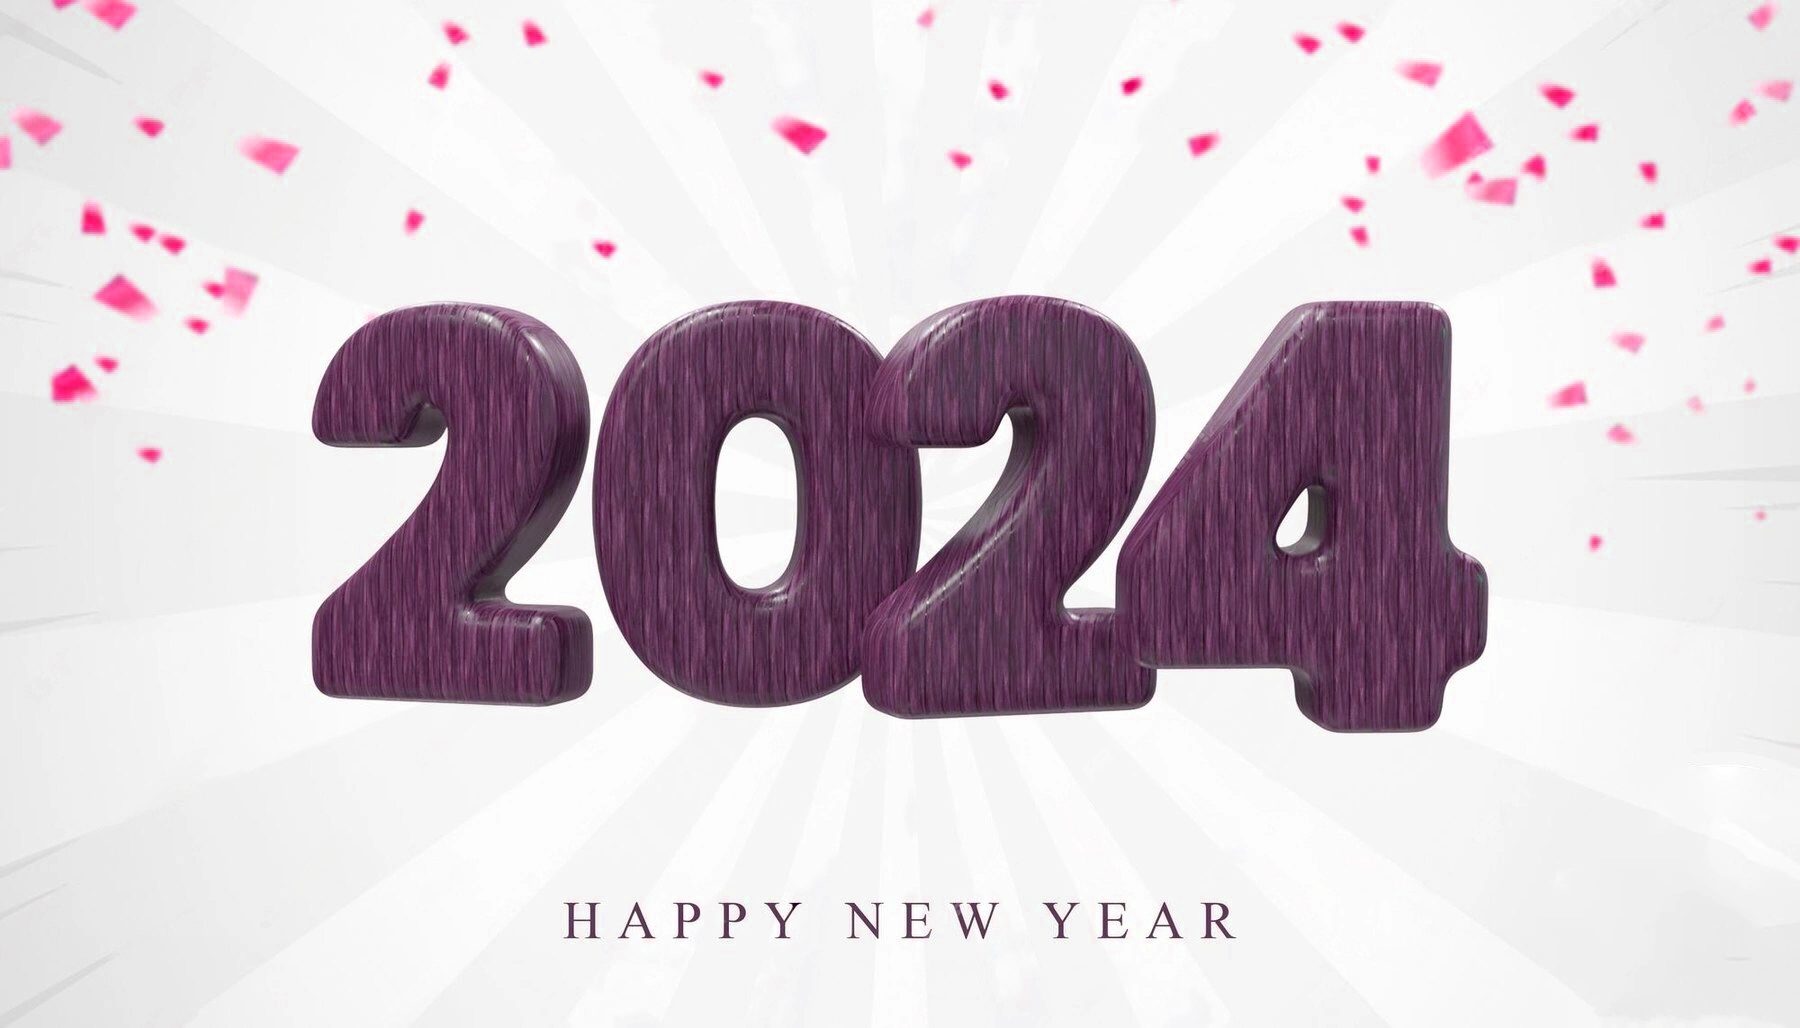 3D Numbers, 2024 Happy New Year, Free HD Image + Wallpapers Download